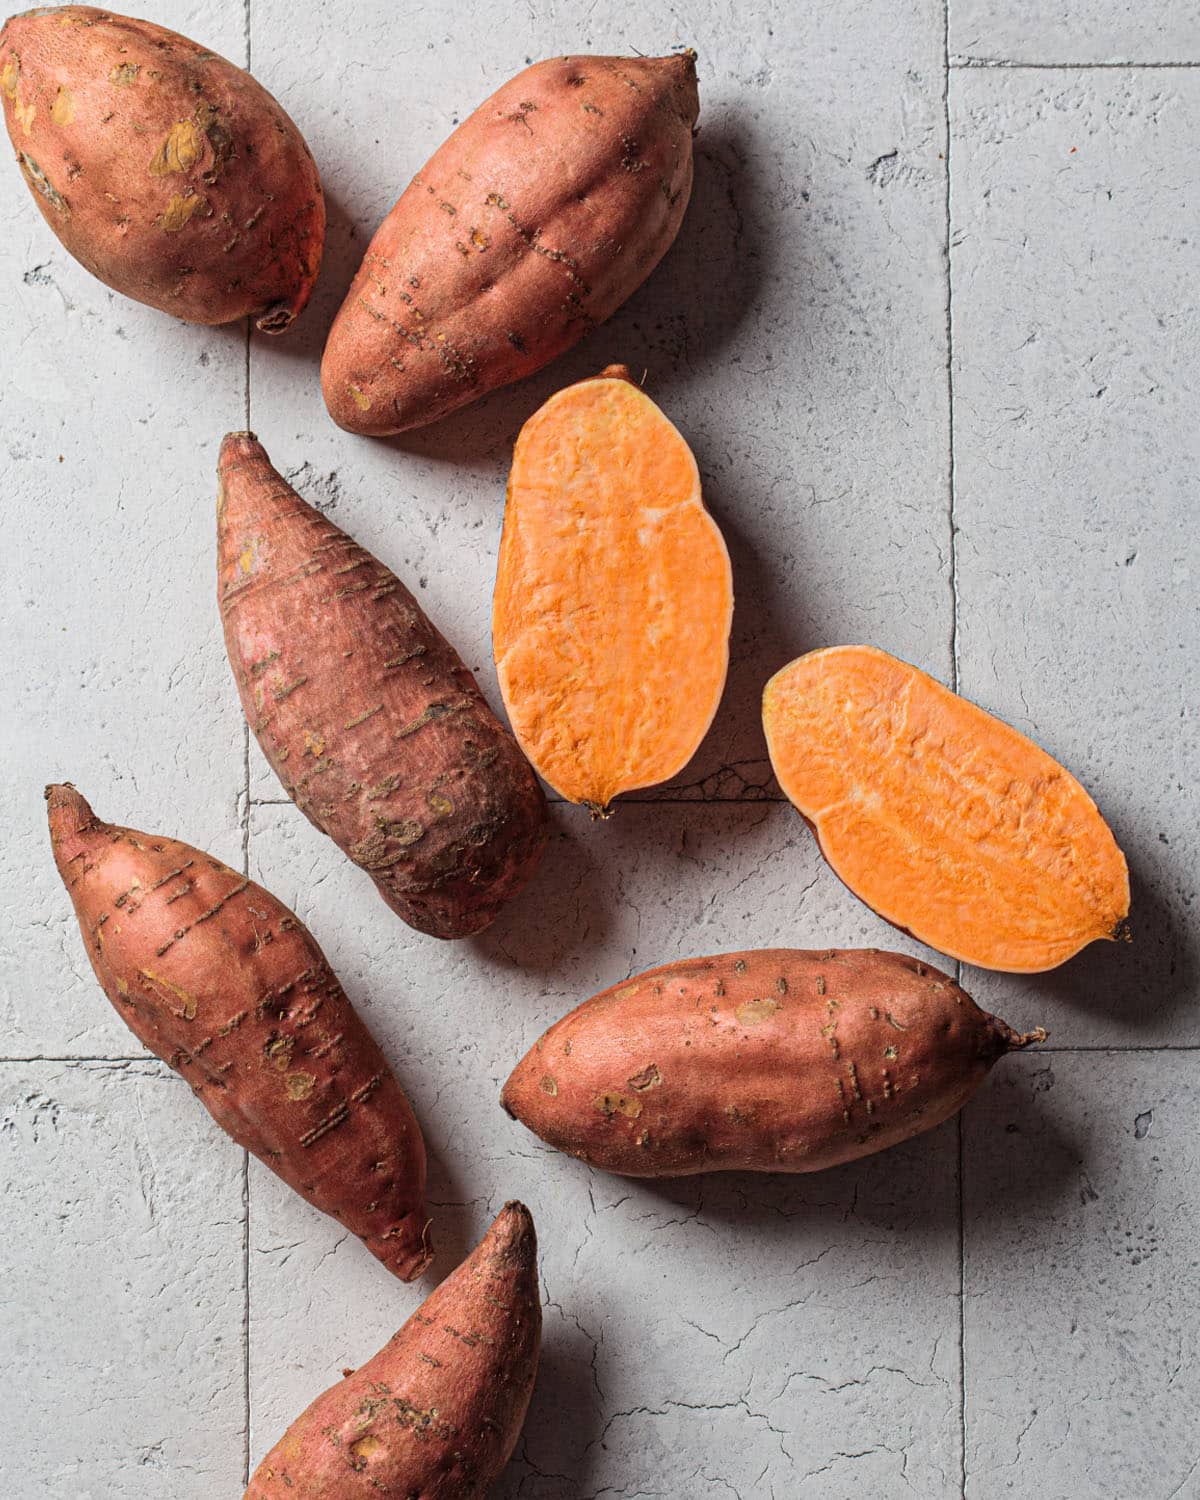 When it comes to cutting sweet potatoes, many people find themselves stumped. The tubers seem to be hard to slice through, even when using a sharp knife. So what's the secret to getting those perfect sweet potato slices?